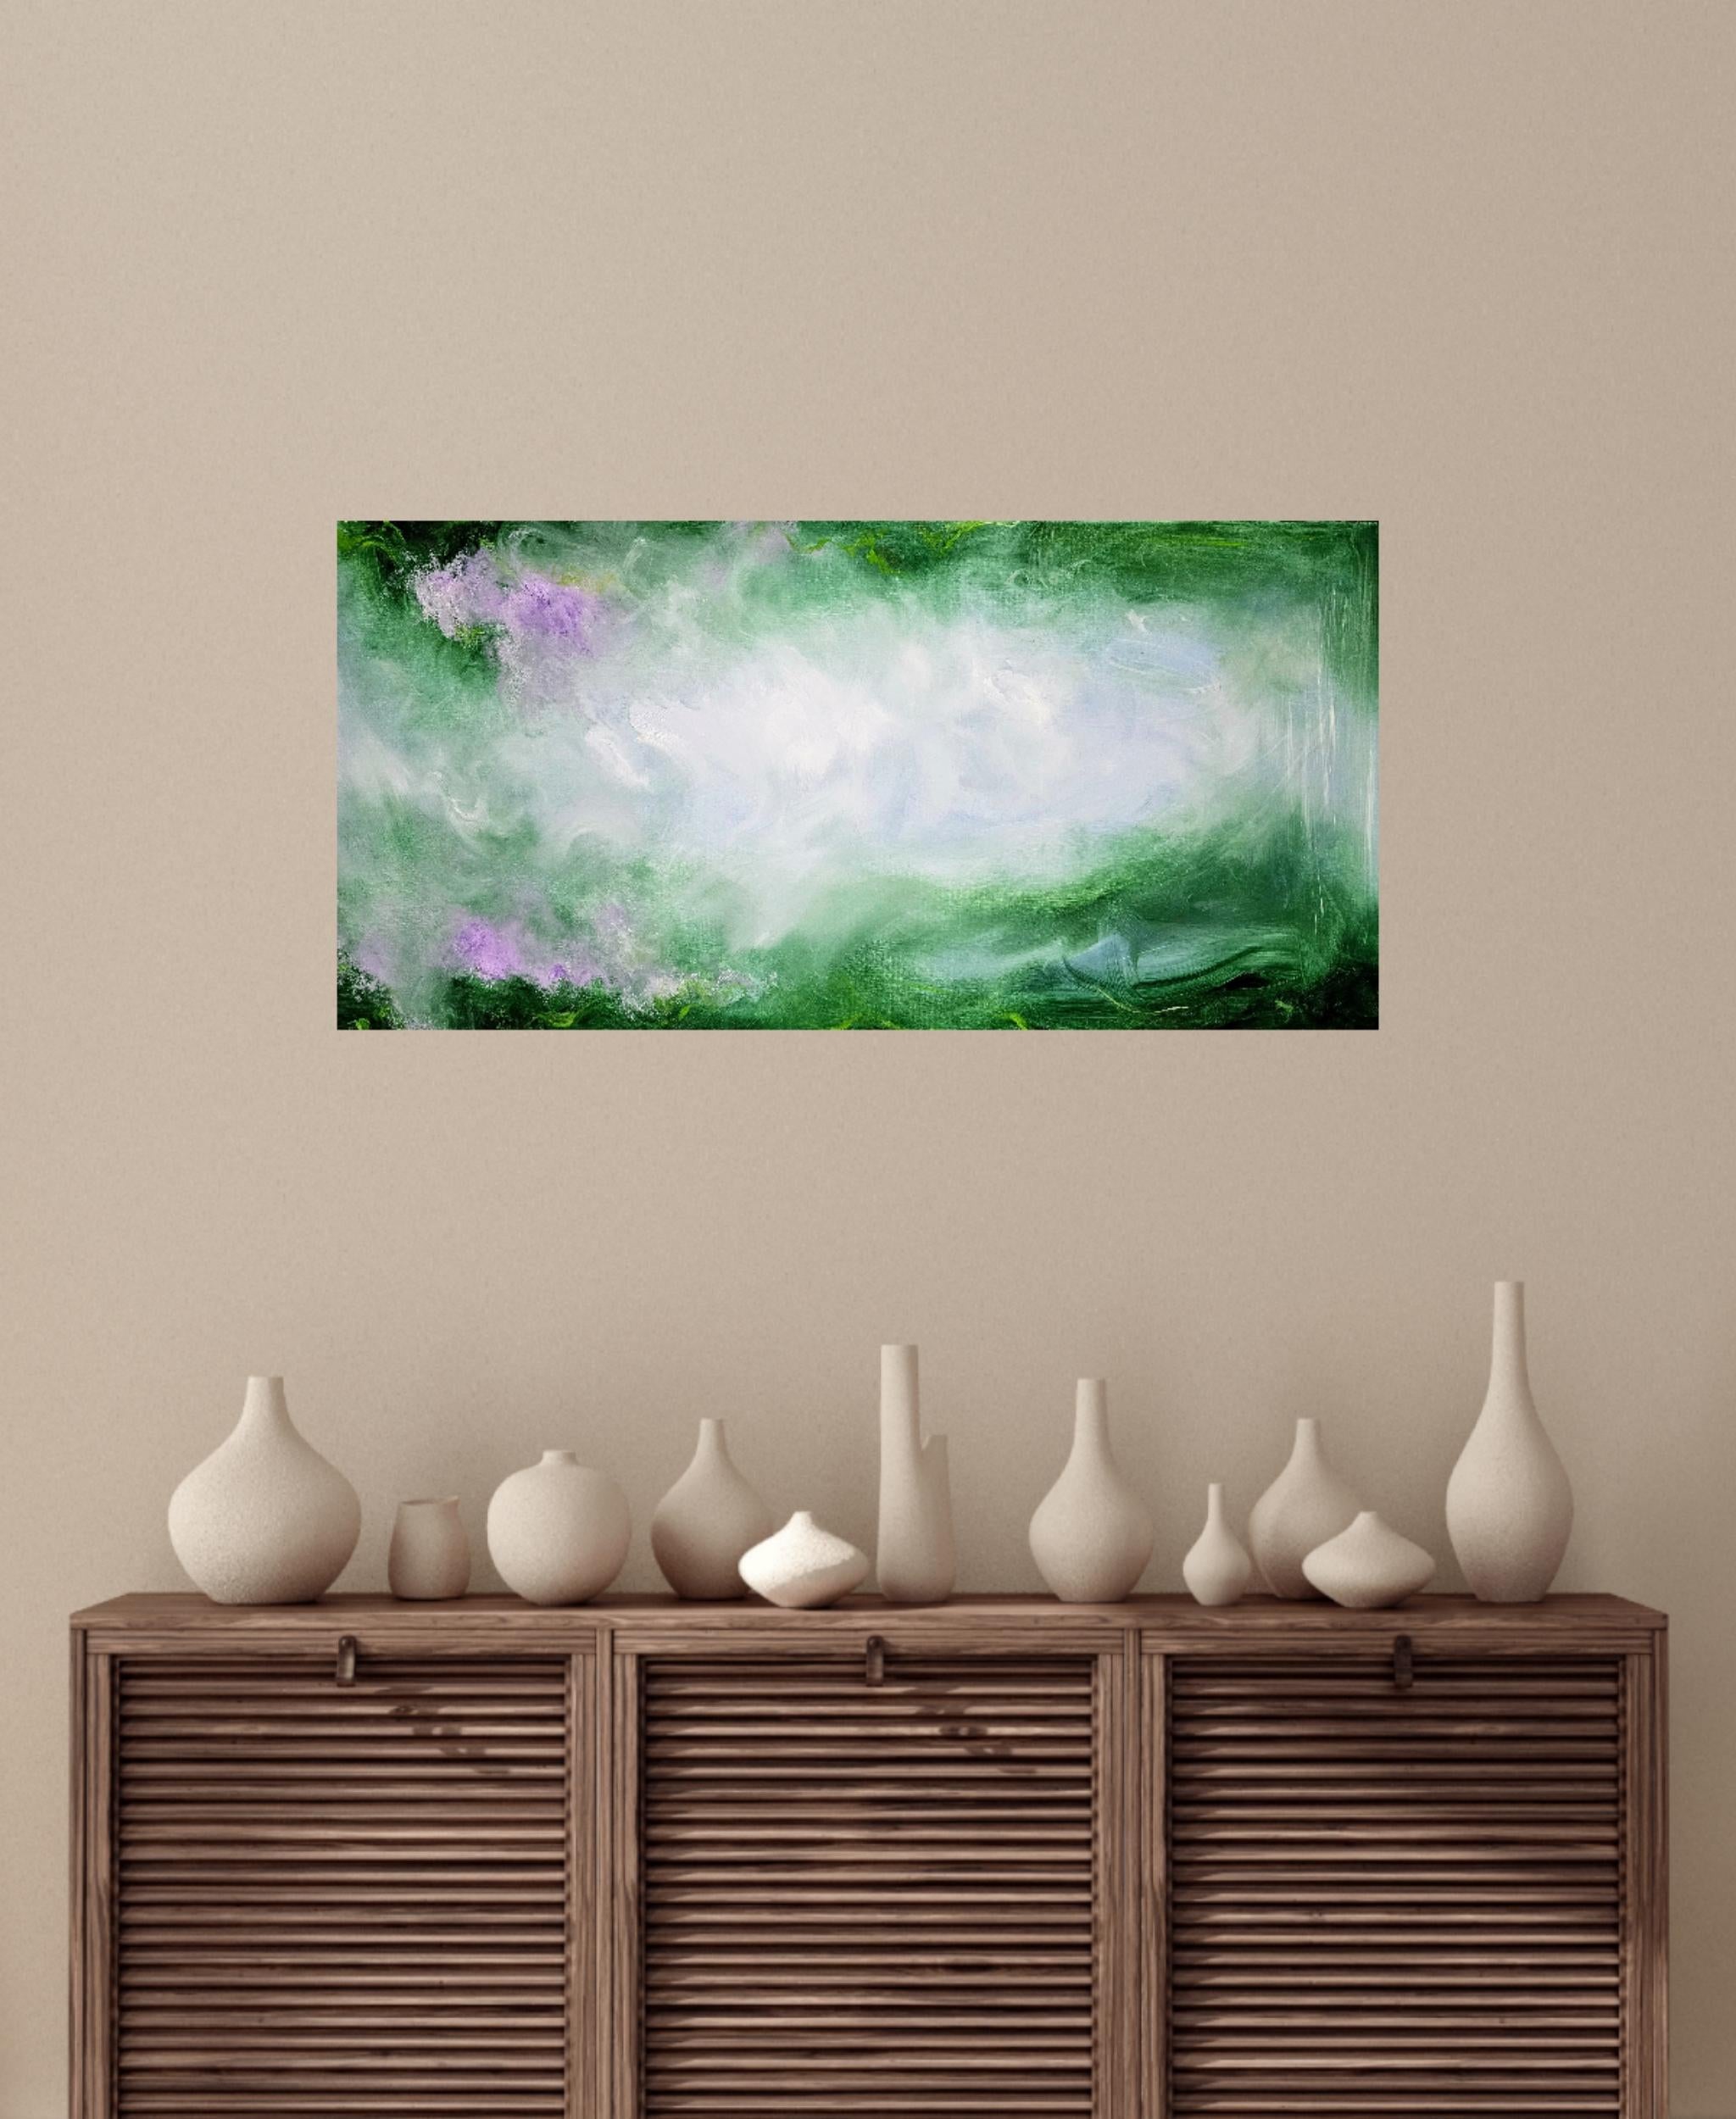 Summer solstice - Vibrant green abstract nature painting For Sale 6